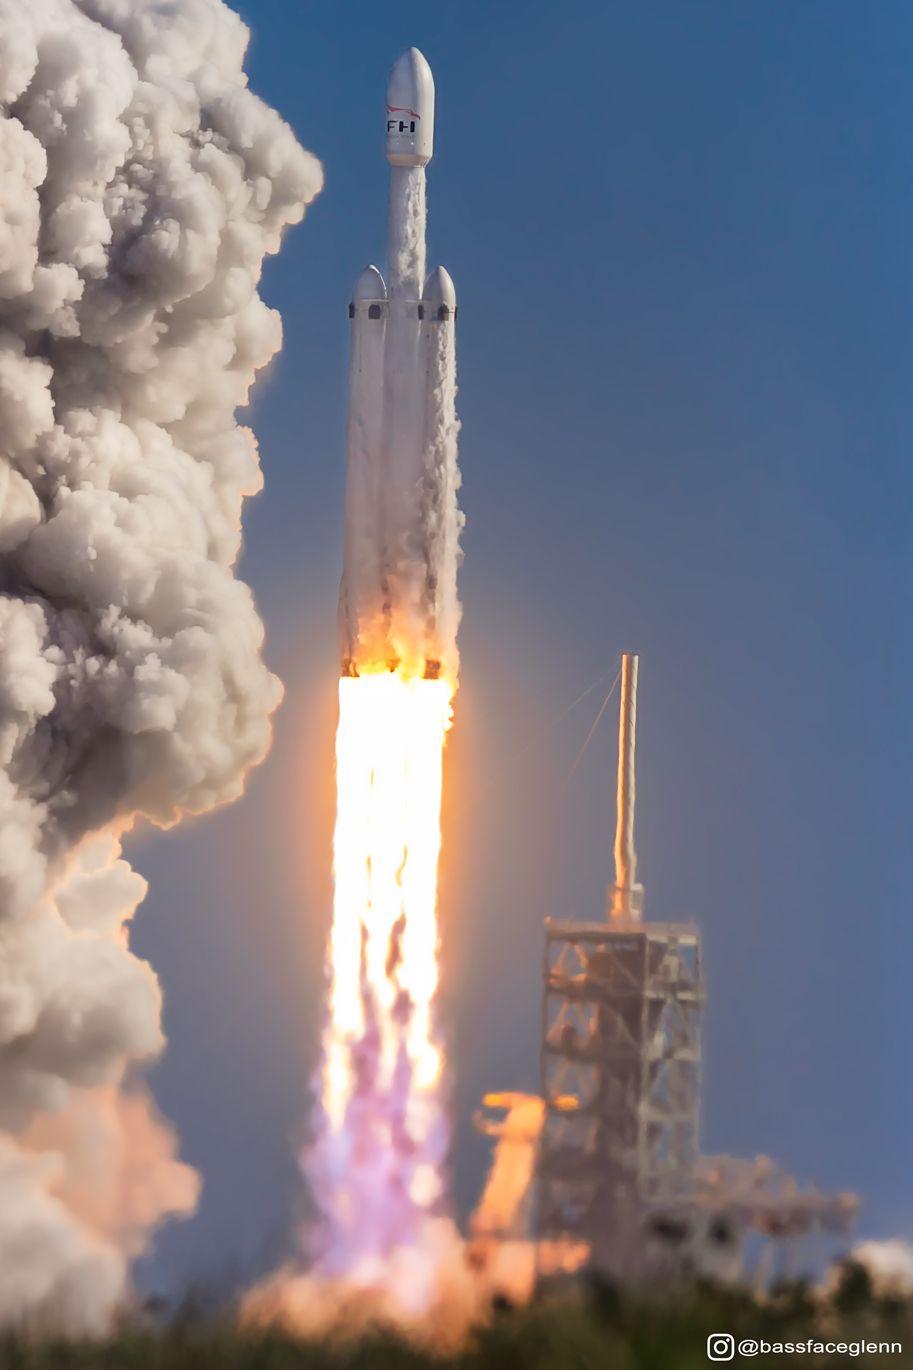 FH Falcon Heavy Logo - Falcon Heavy Liftoff! Shot 4 miles away with camera connected to a ...